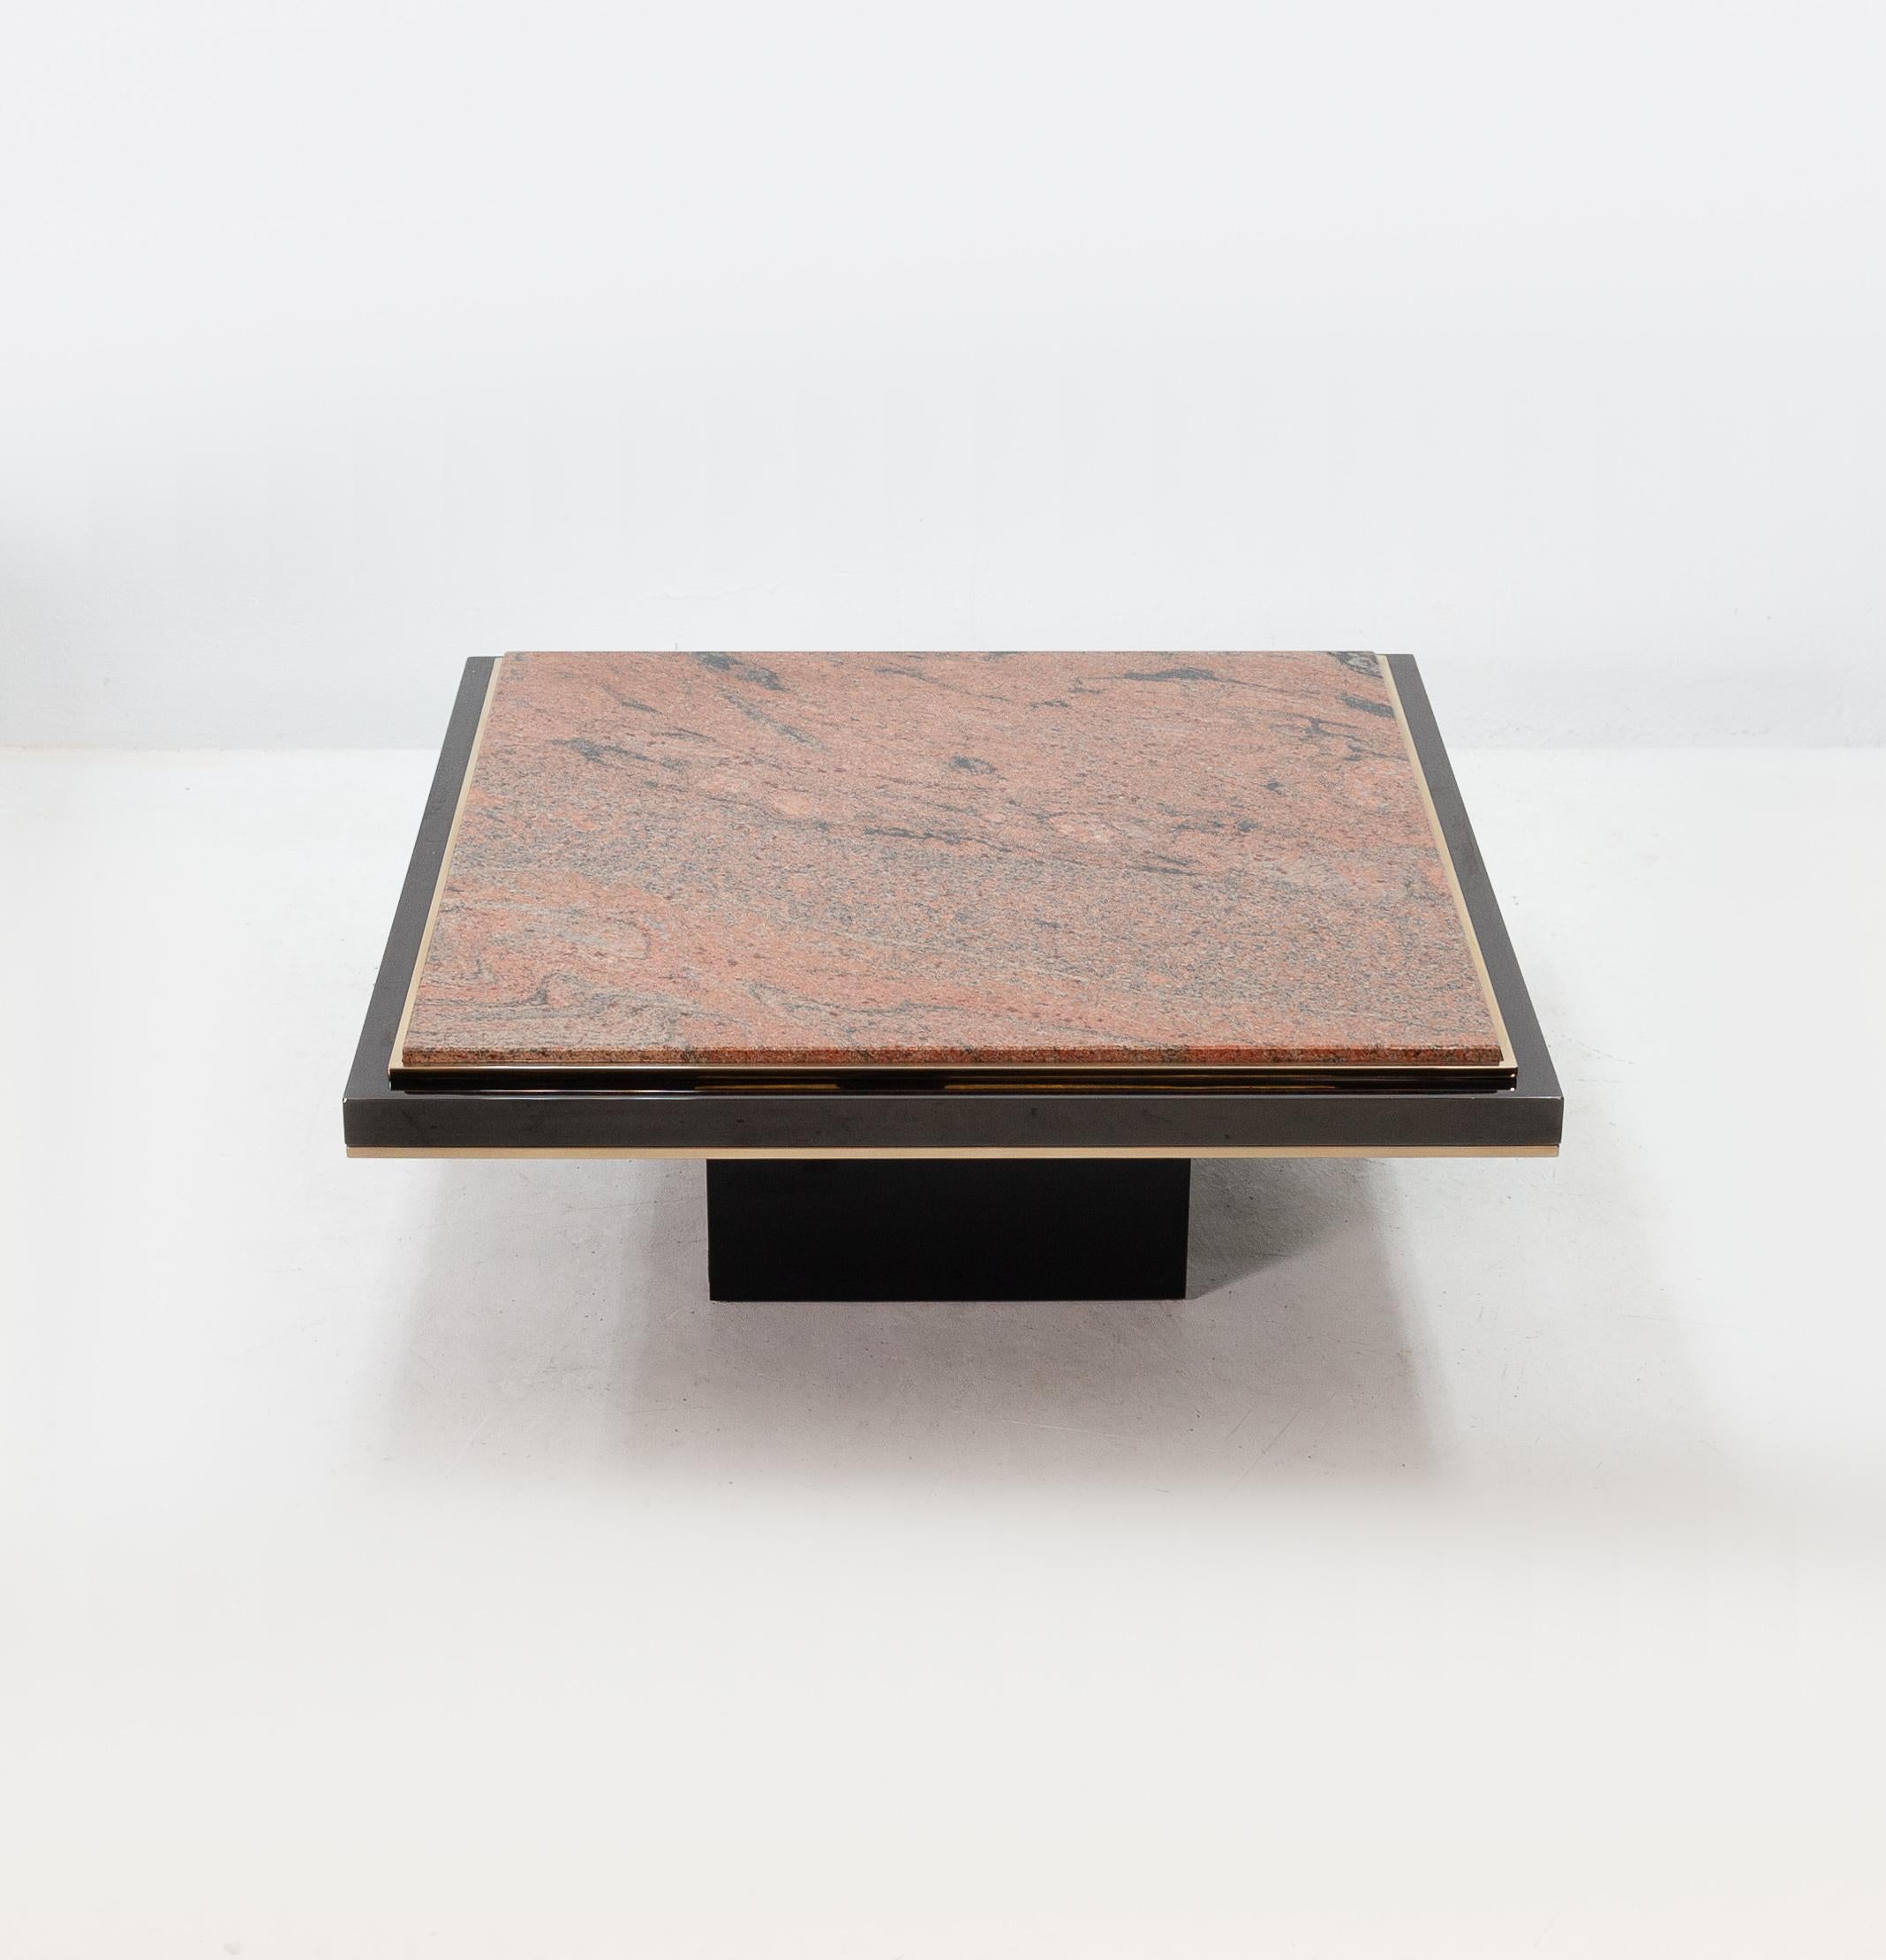 Fantastic square coffee table. Produced by Belgo Chrome. Belgie 1970s. Black Aluminum frame. With a 23-carat gold trim. Comes with a Red color marble top. Great looking table, in a good condition.

   